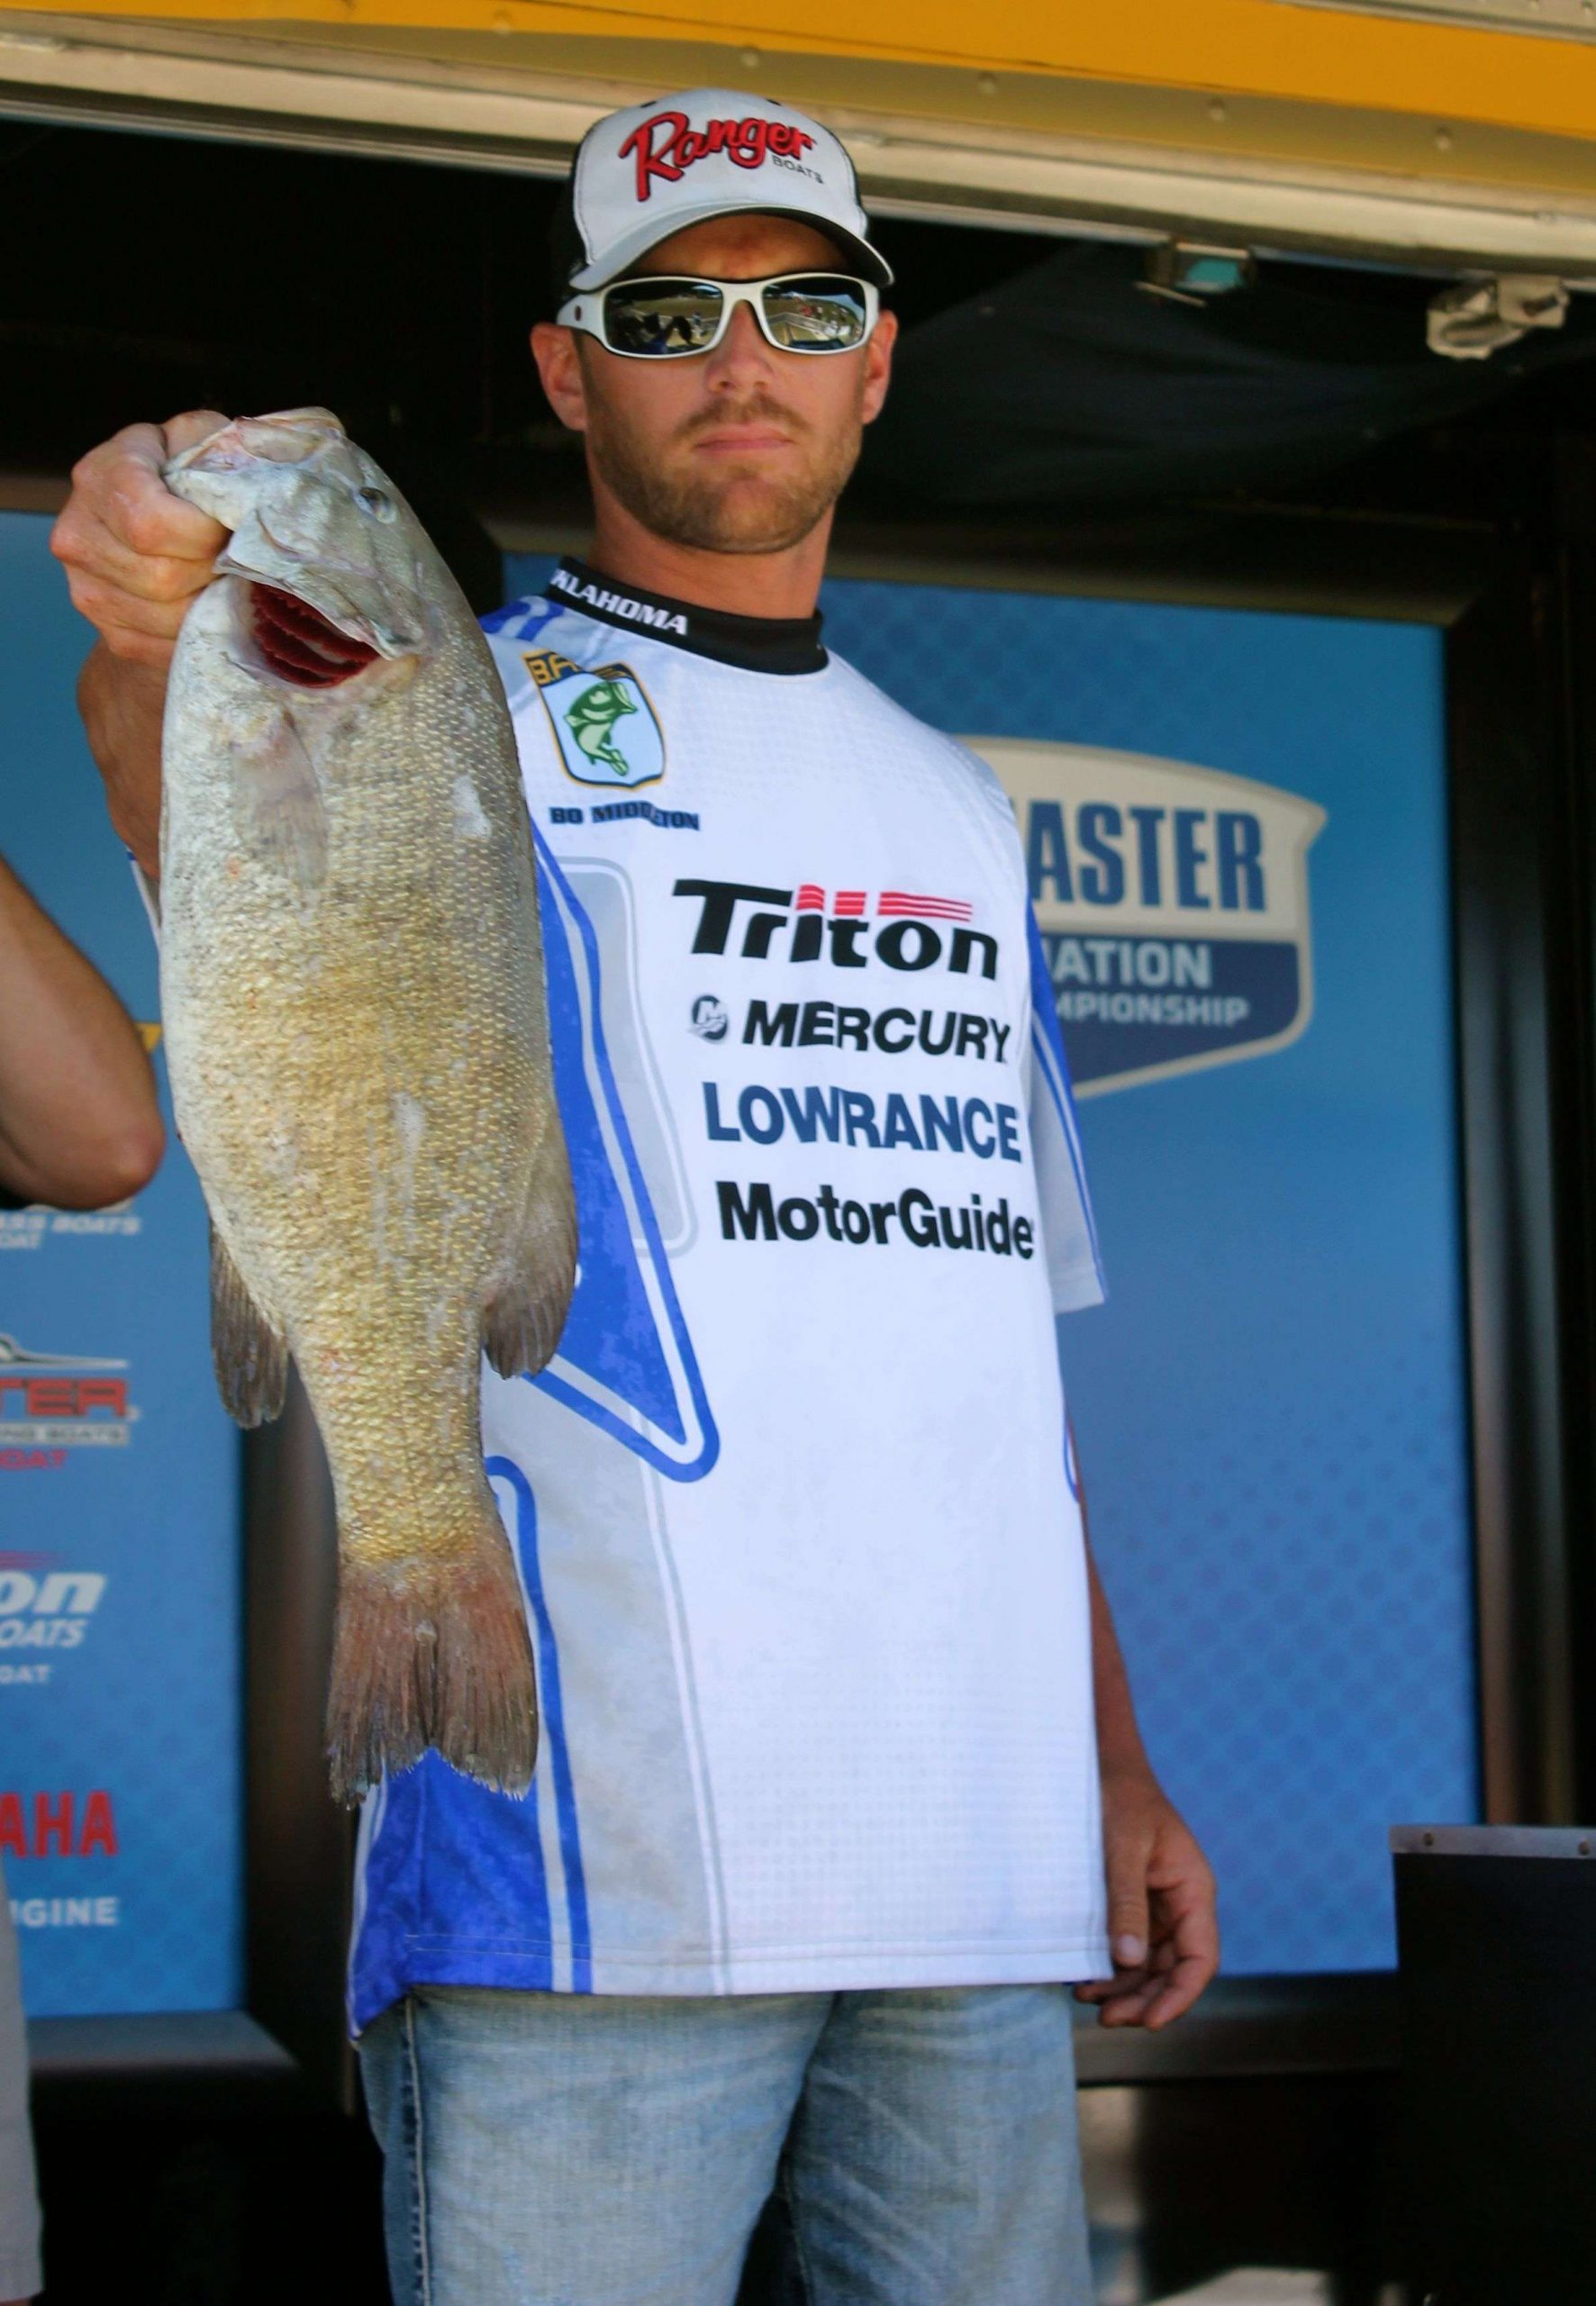 Although Bo Middleton only weighed one fish, it was a good one. His 5-pound, 8-ounce smallmouth was the biggest bass weighed in on Day 1.